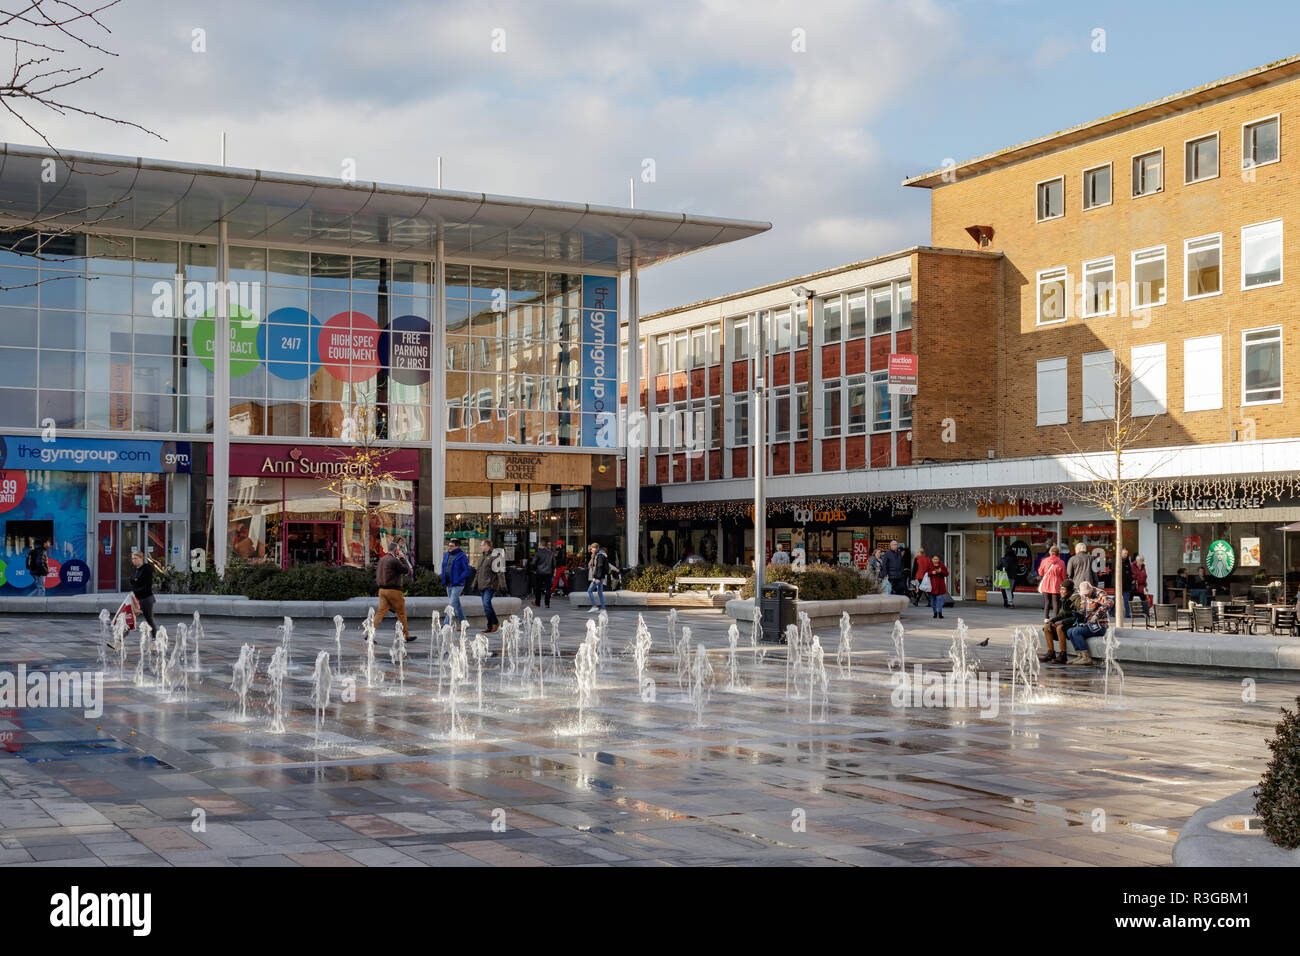 CRAWLEY, WEST SUSSEX/UK - NOVEMBER 21 : View of the main square in Crawley West Sussex on November 21, 2018. Unidentified people. Stock Photo